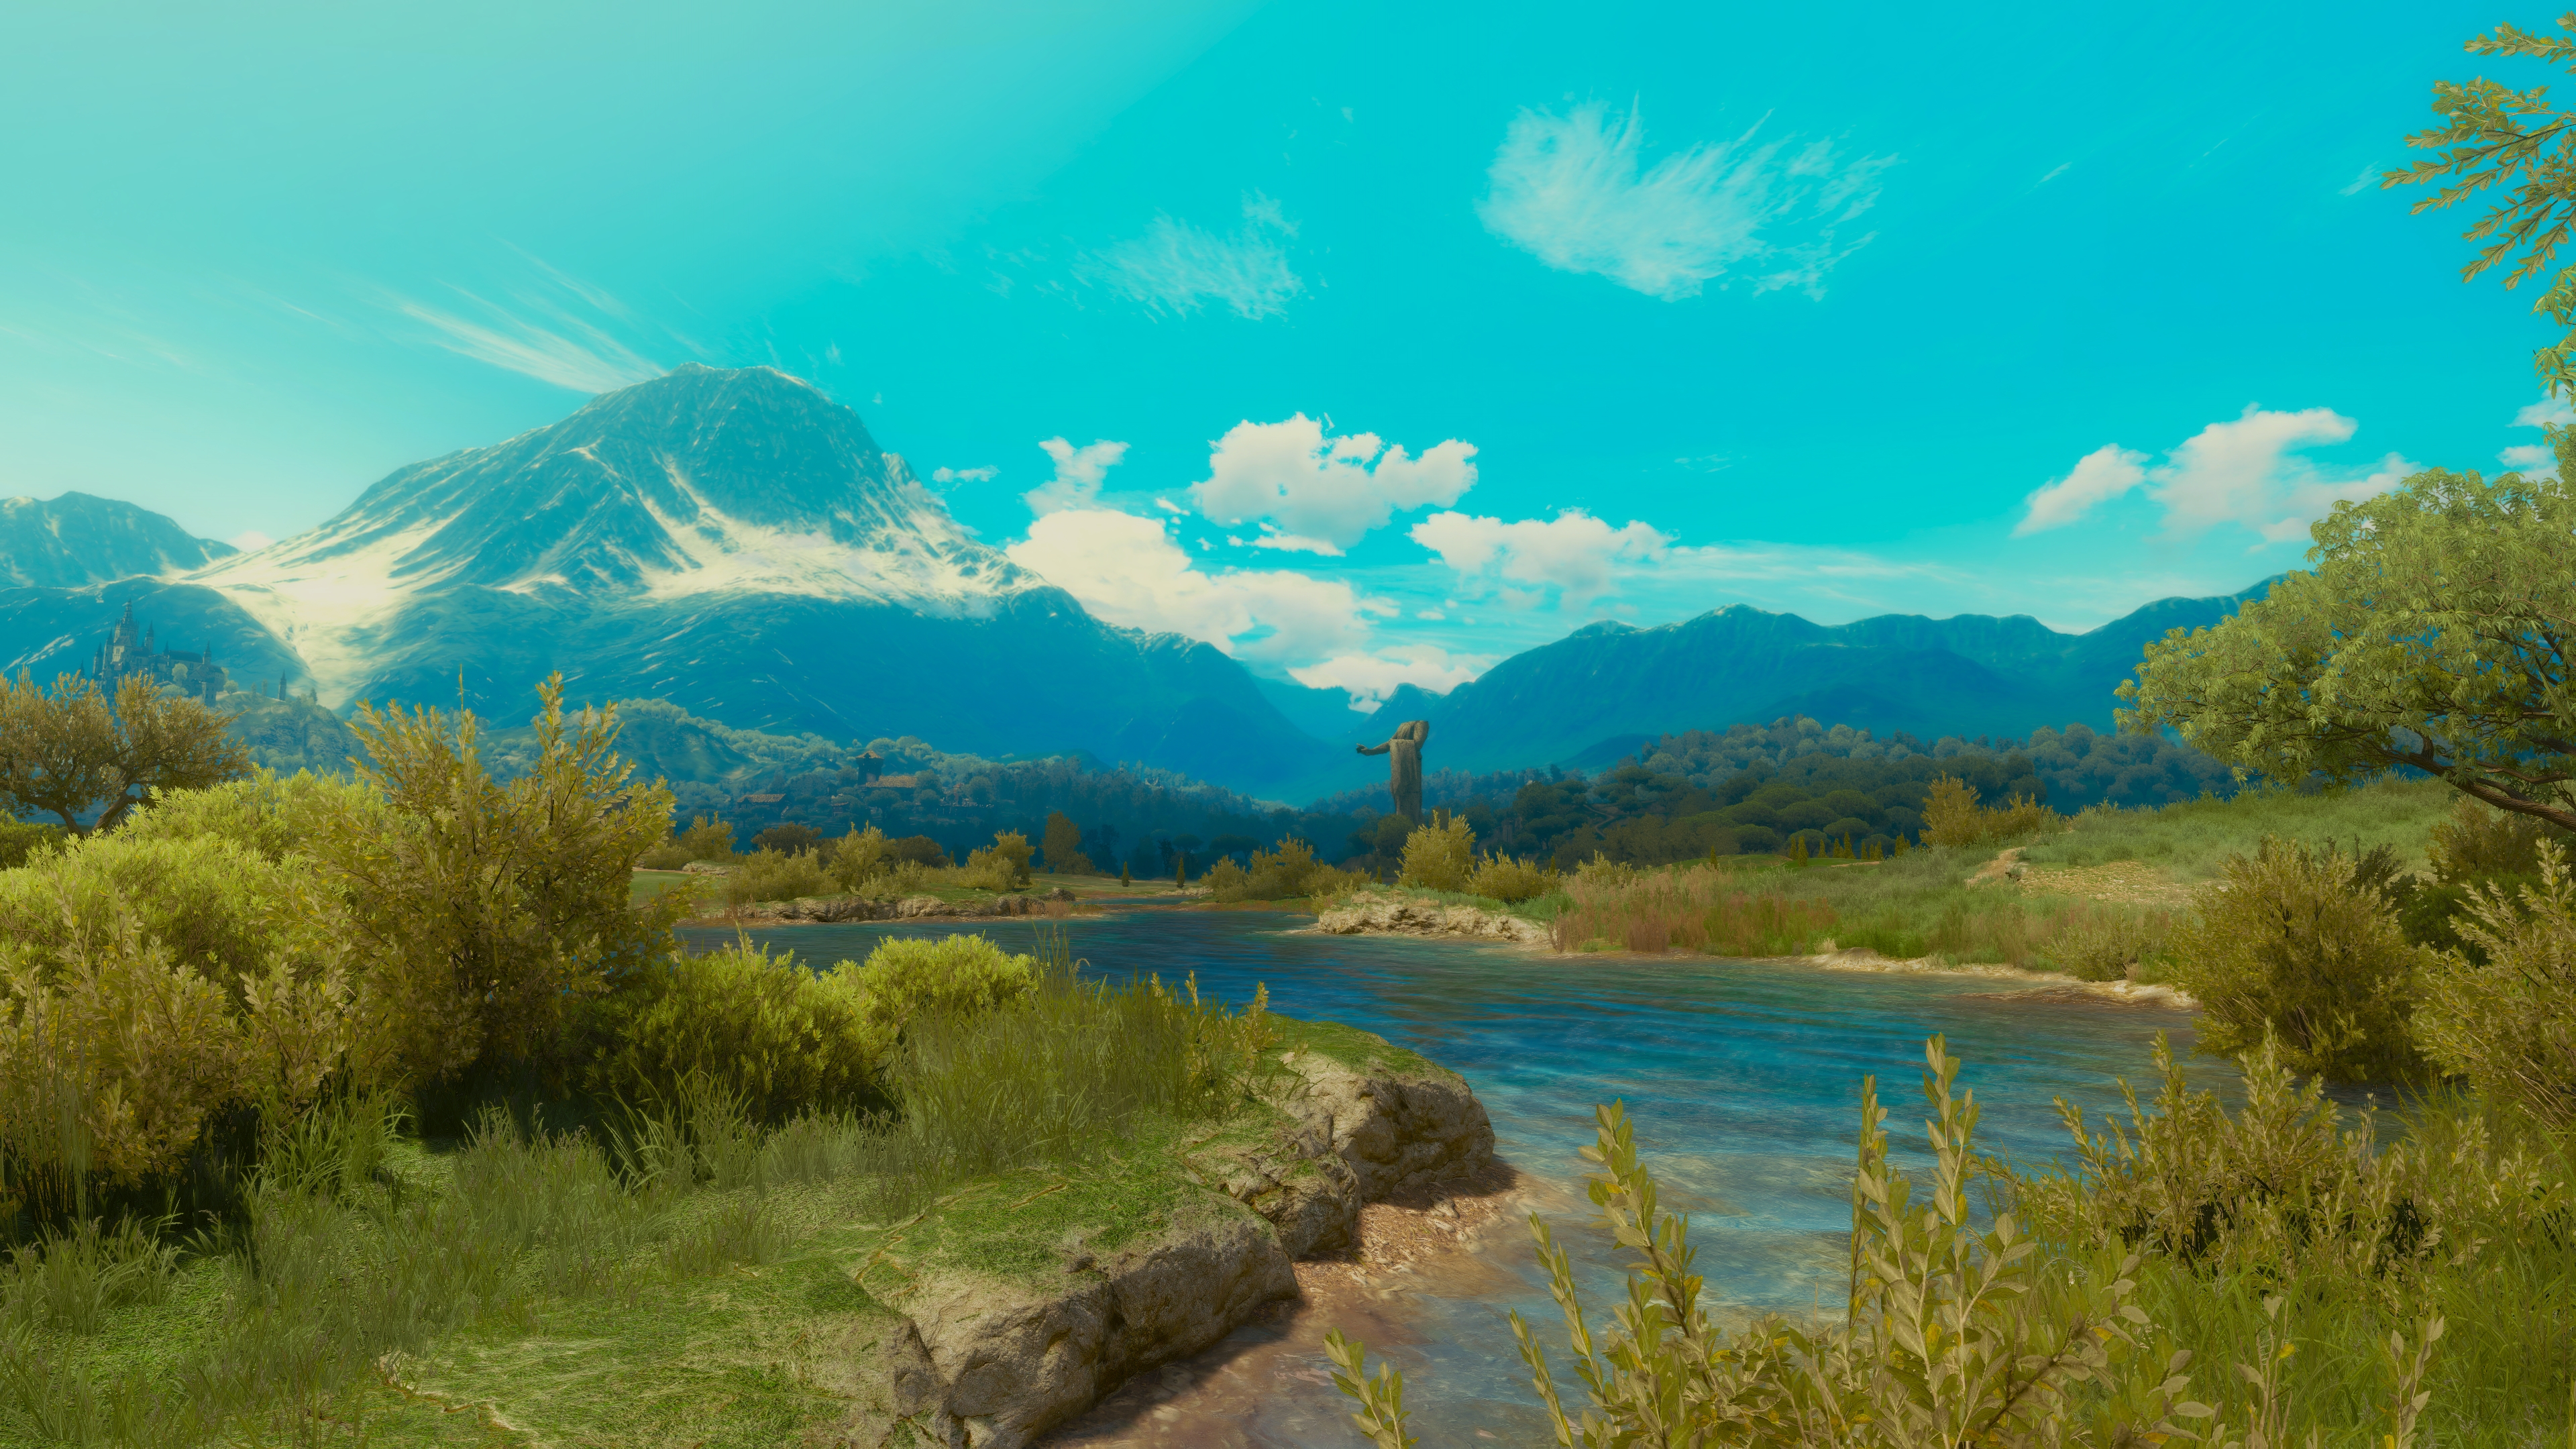 General 3840x2160 The Witcher 3: Wild Hunt screen shot PC gaming tussent video game art video games mountains sky water clouds grass river CGI statue leaves castle nature